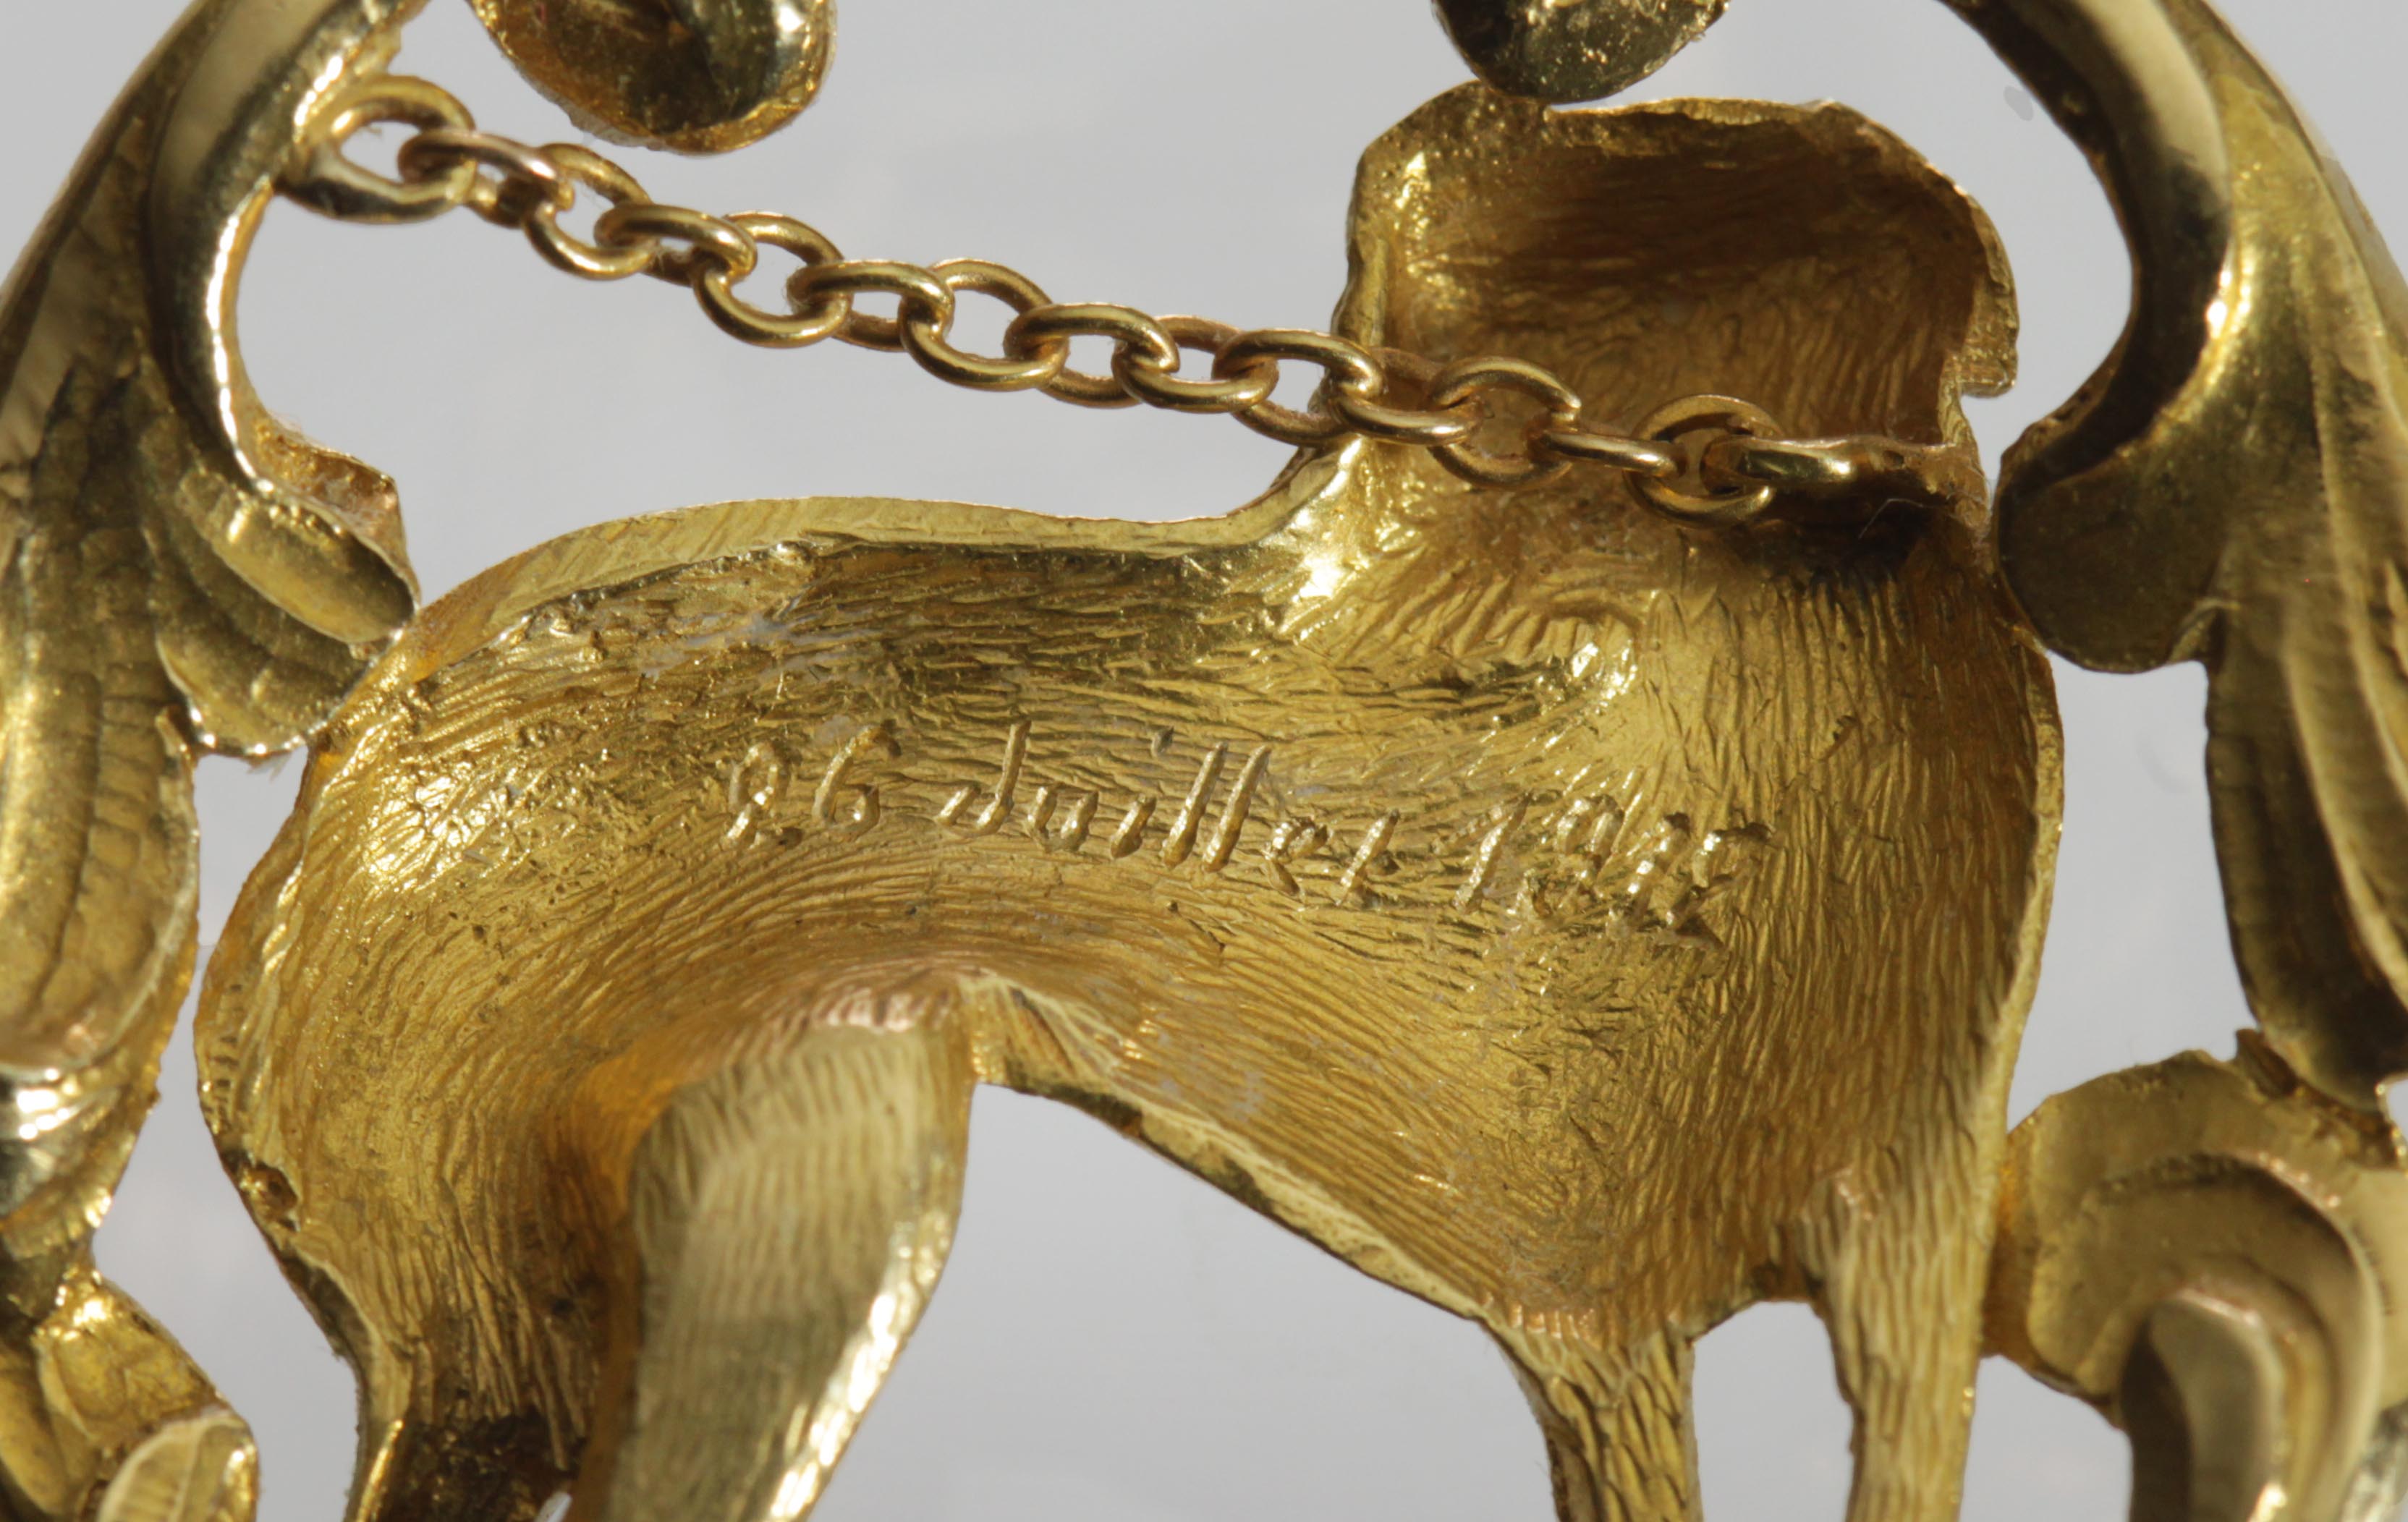 Click to see full size: Circa 1910, French 18 carat gold Levrier / Greyhound / Whippet pendant- Circa 1910, French 18 carat gold Levrier / Greyhound / Whippet pendant